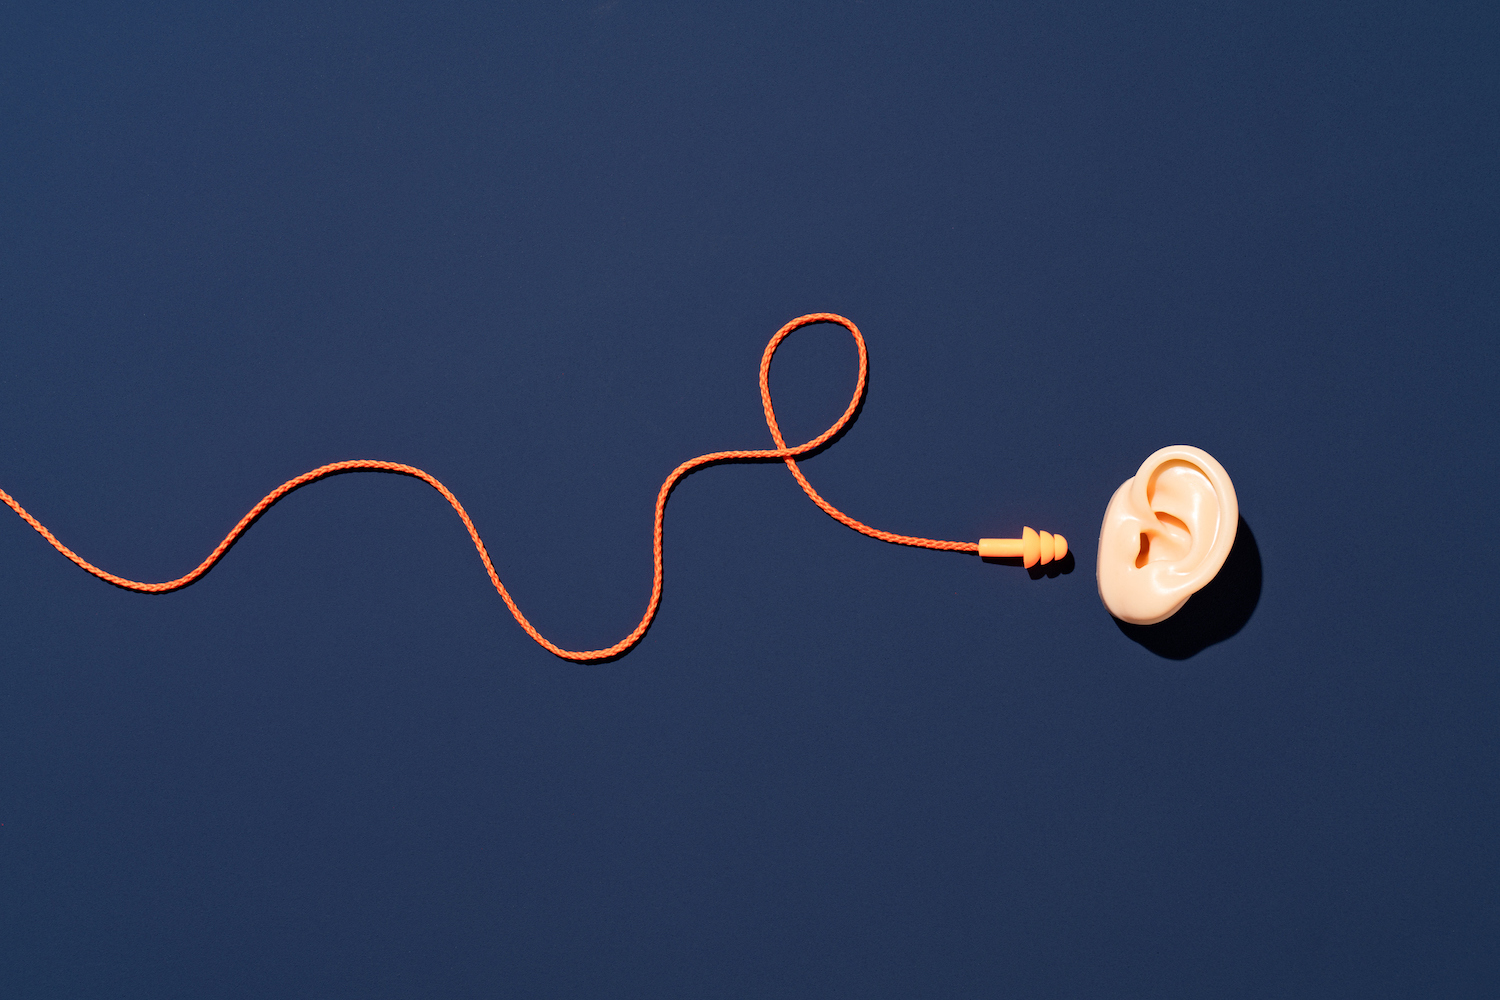 Orange Ear Plugs with Curved String Reach to Ear on Blue Background Directly above View.  4 tips for RevOps teams to filter out the noise and focus on the big picture